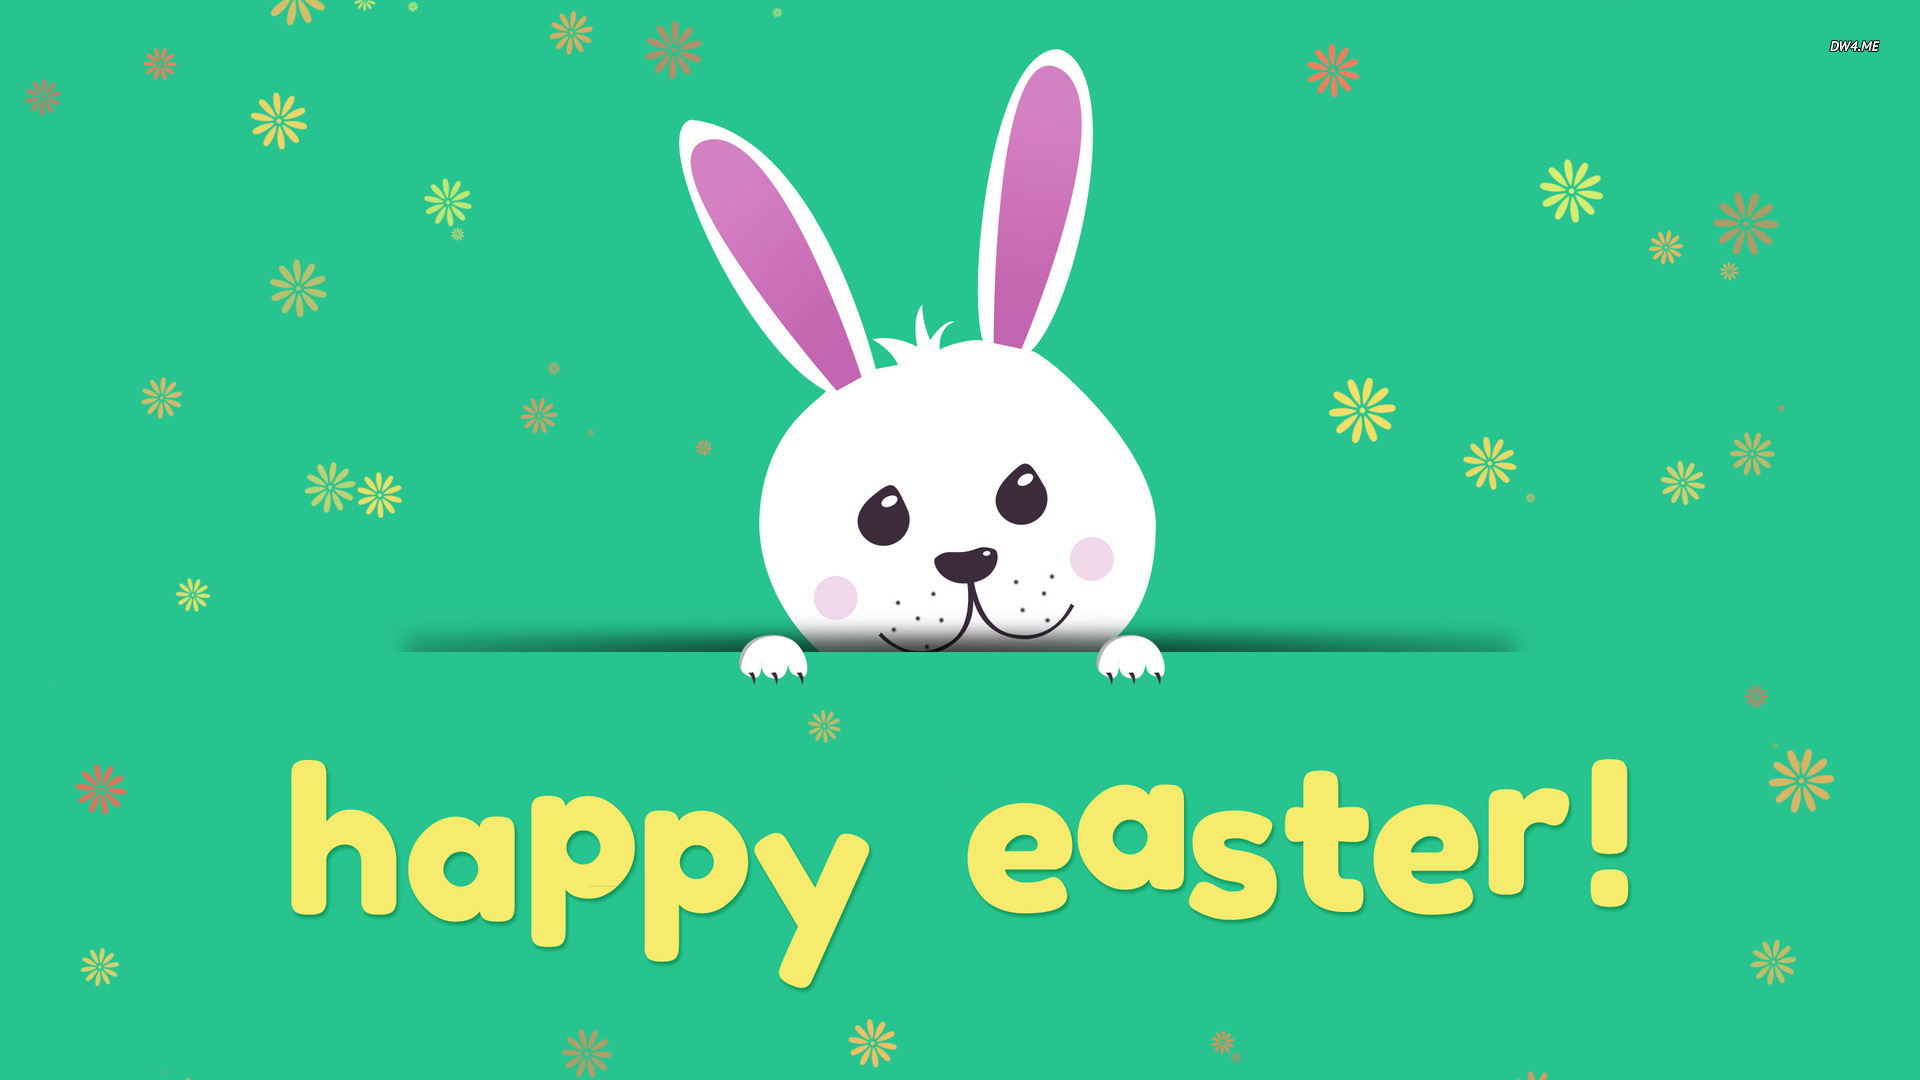 Easter bunny wallpaper   Holiday wallpapers   2202